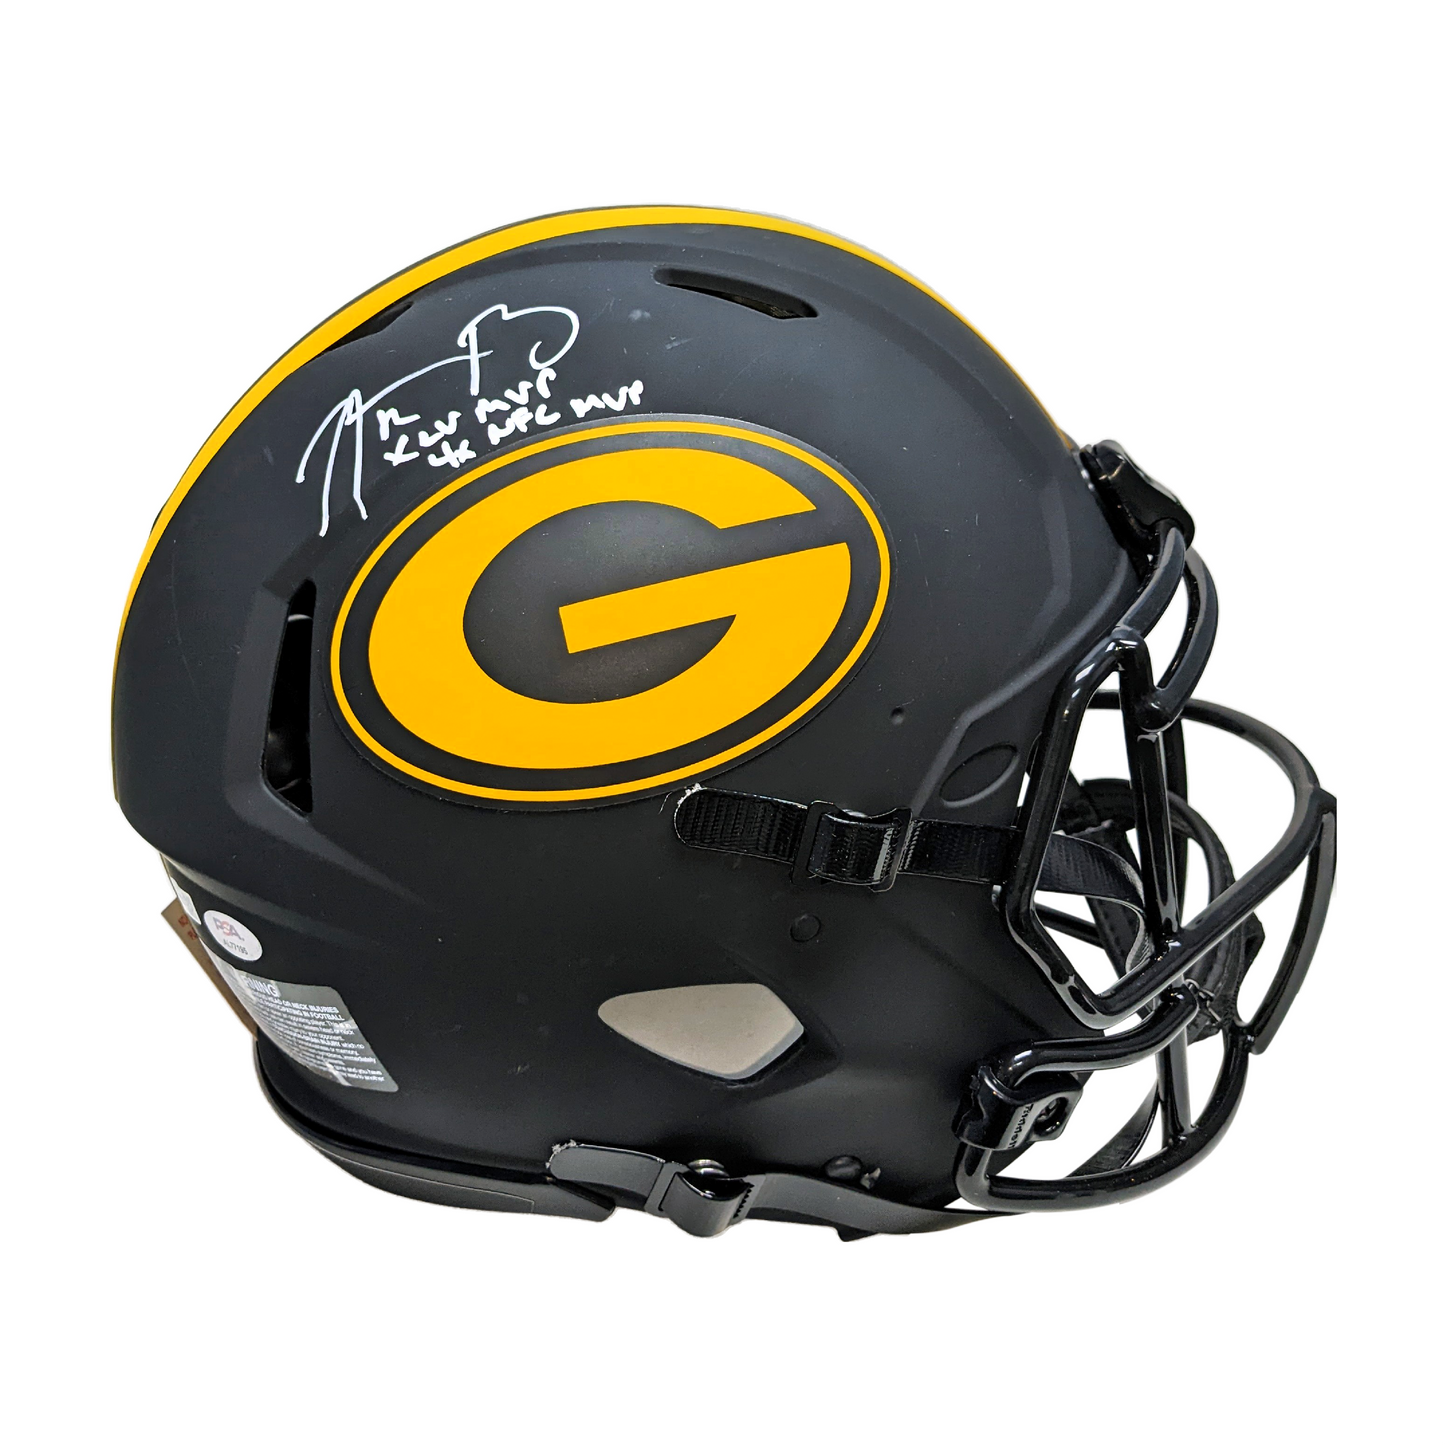 Green Bay Packers Helmets at the Packers Pro Shop